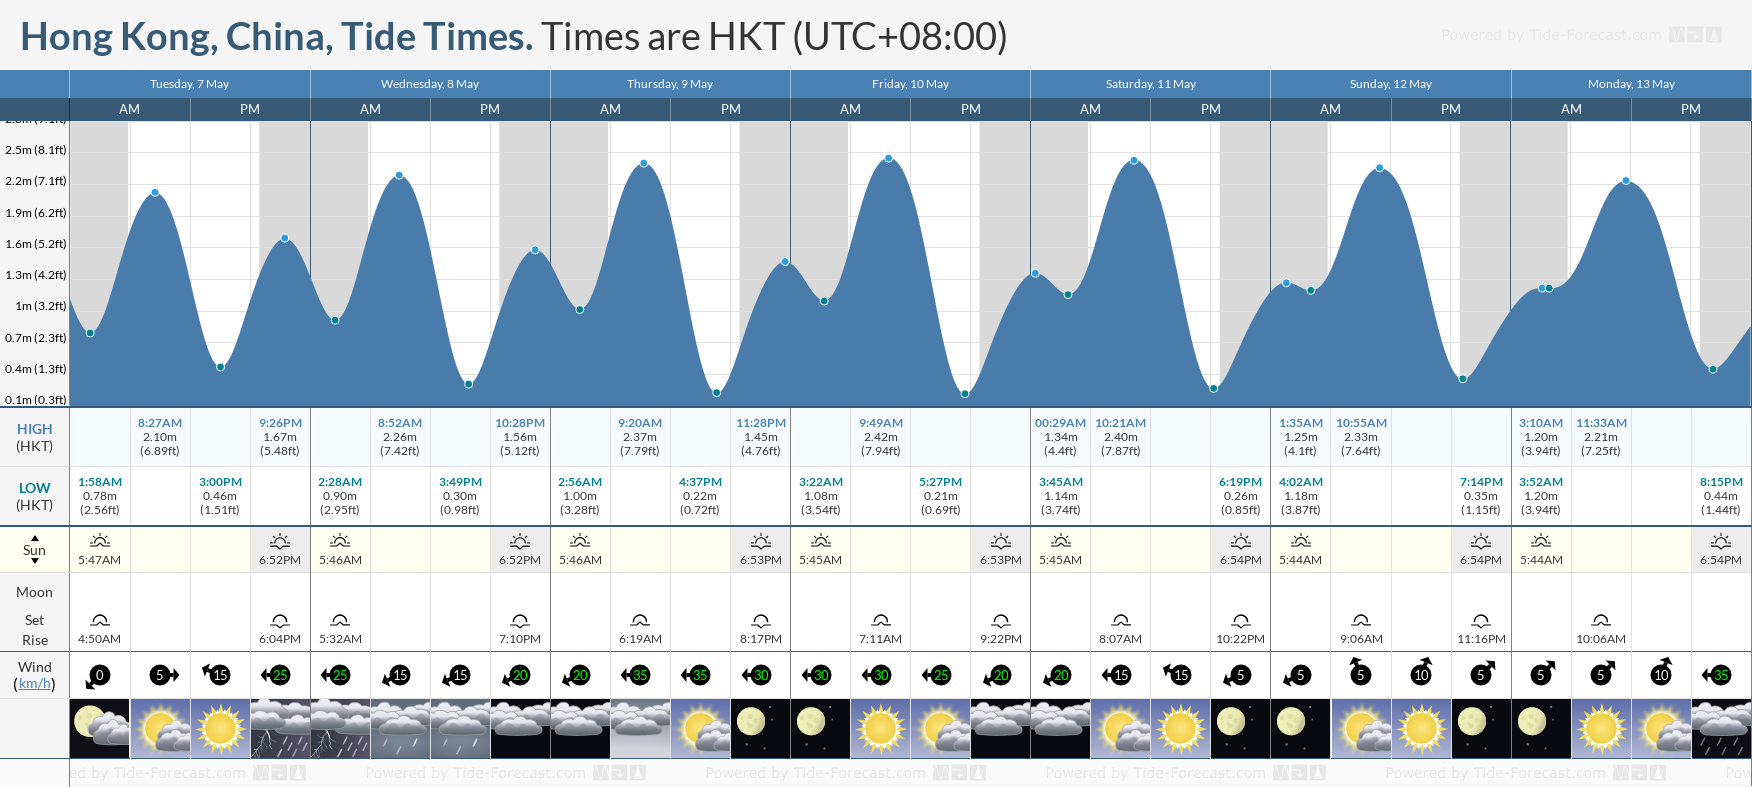 Hong Kong, China Tide Chart including high and low tide tide times for the next 7 days